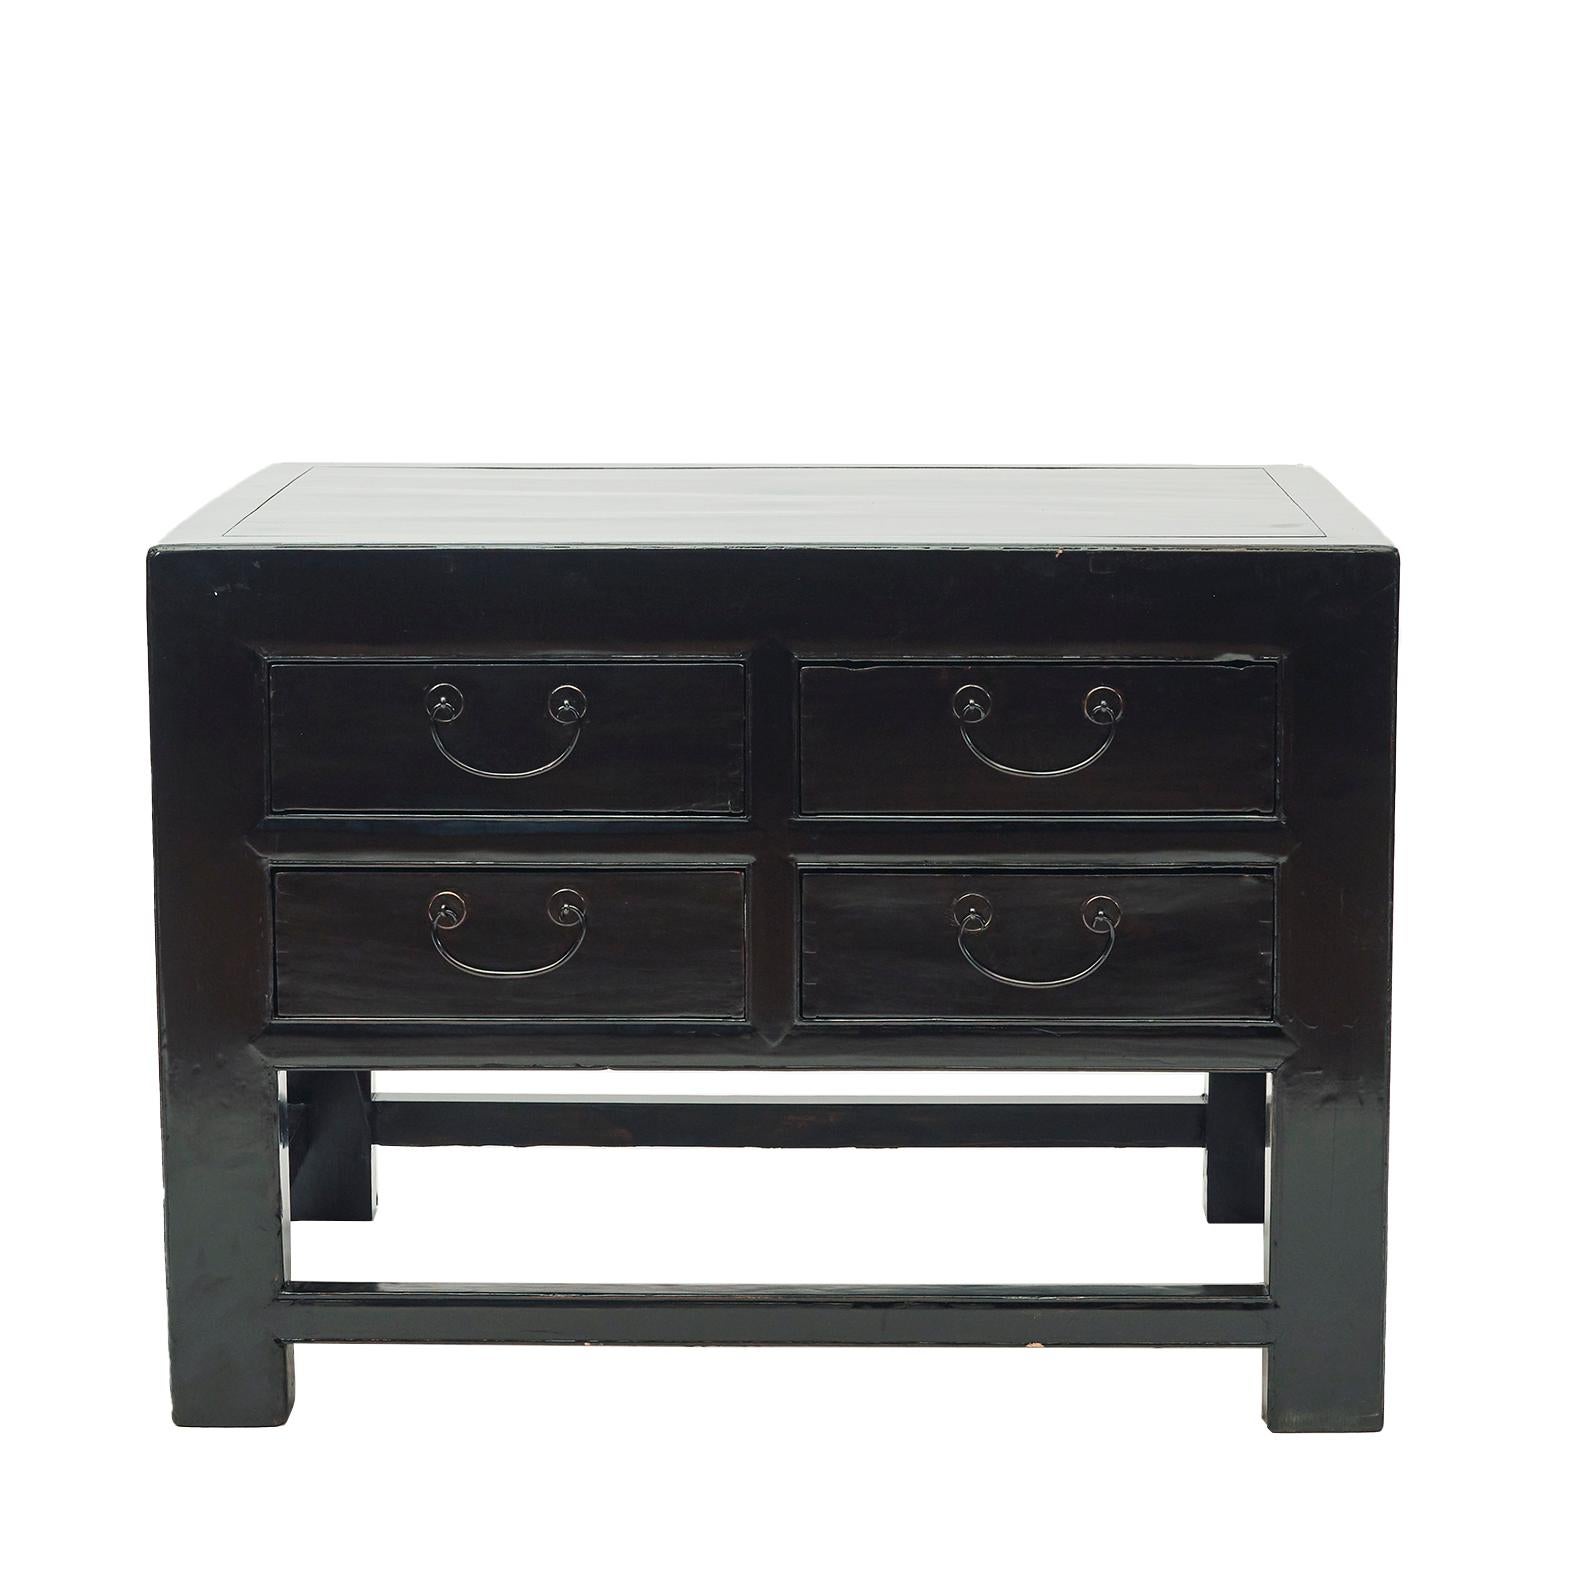 Freestanding black lacquered center console table.

Features a front with four drawers with pulls and profiled fillings on the three other sides.
Refined and elegant art deco table with its clean lines and minimal ornamentation.

The table top panel